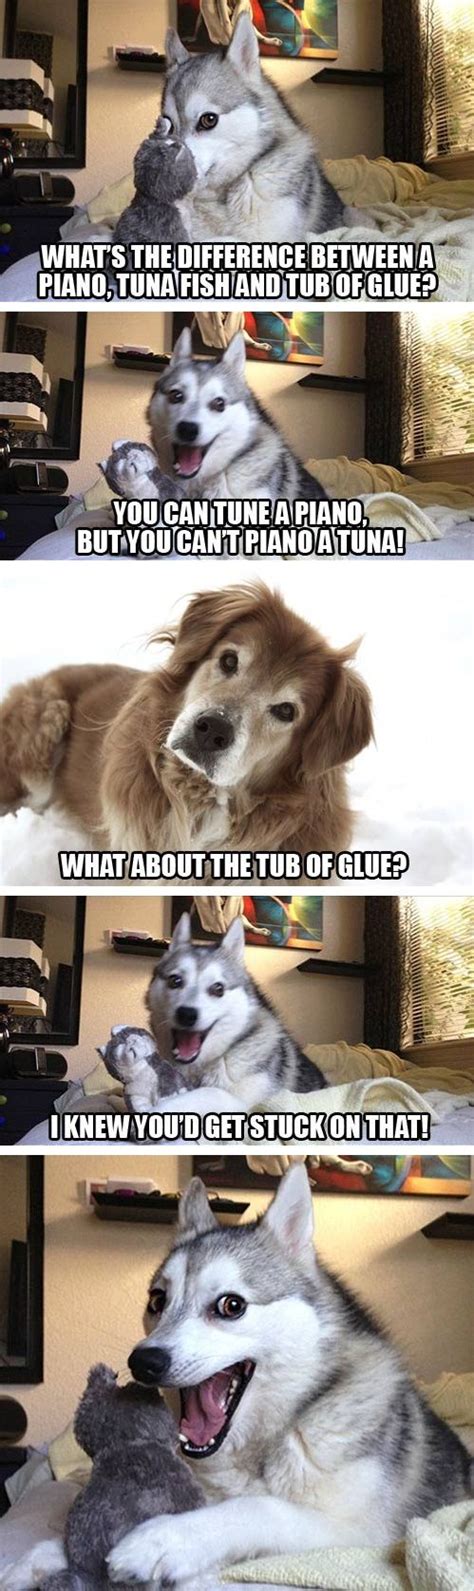 Find funny gifs, cute gifs, reaction gifs and more. Meme Watch: Pun Dog Isn't Fat, He's Just A Little Husky ...